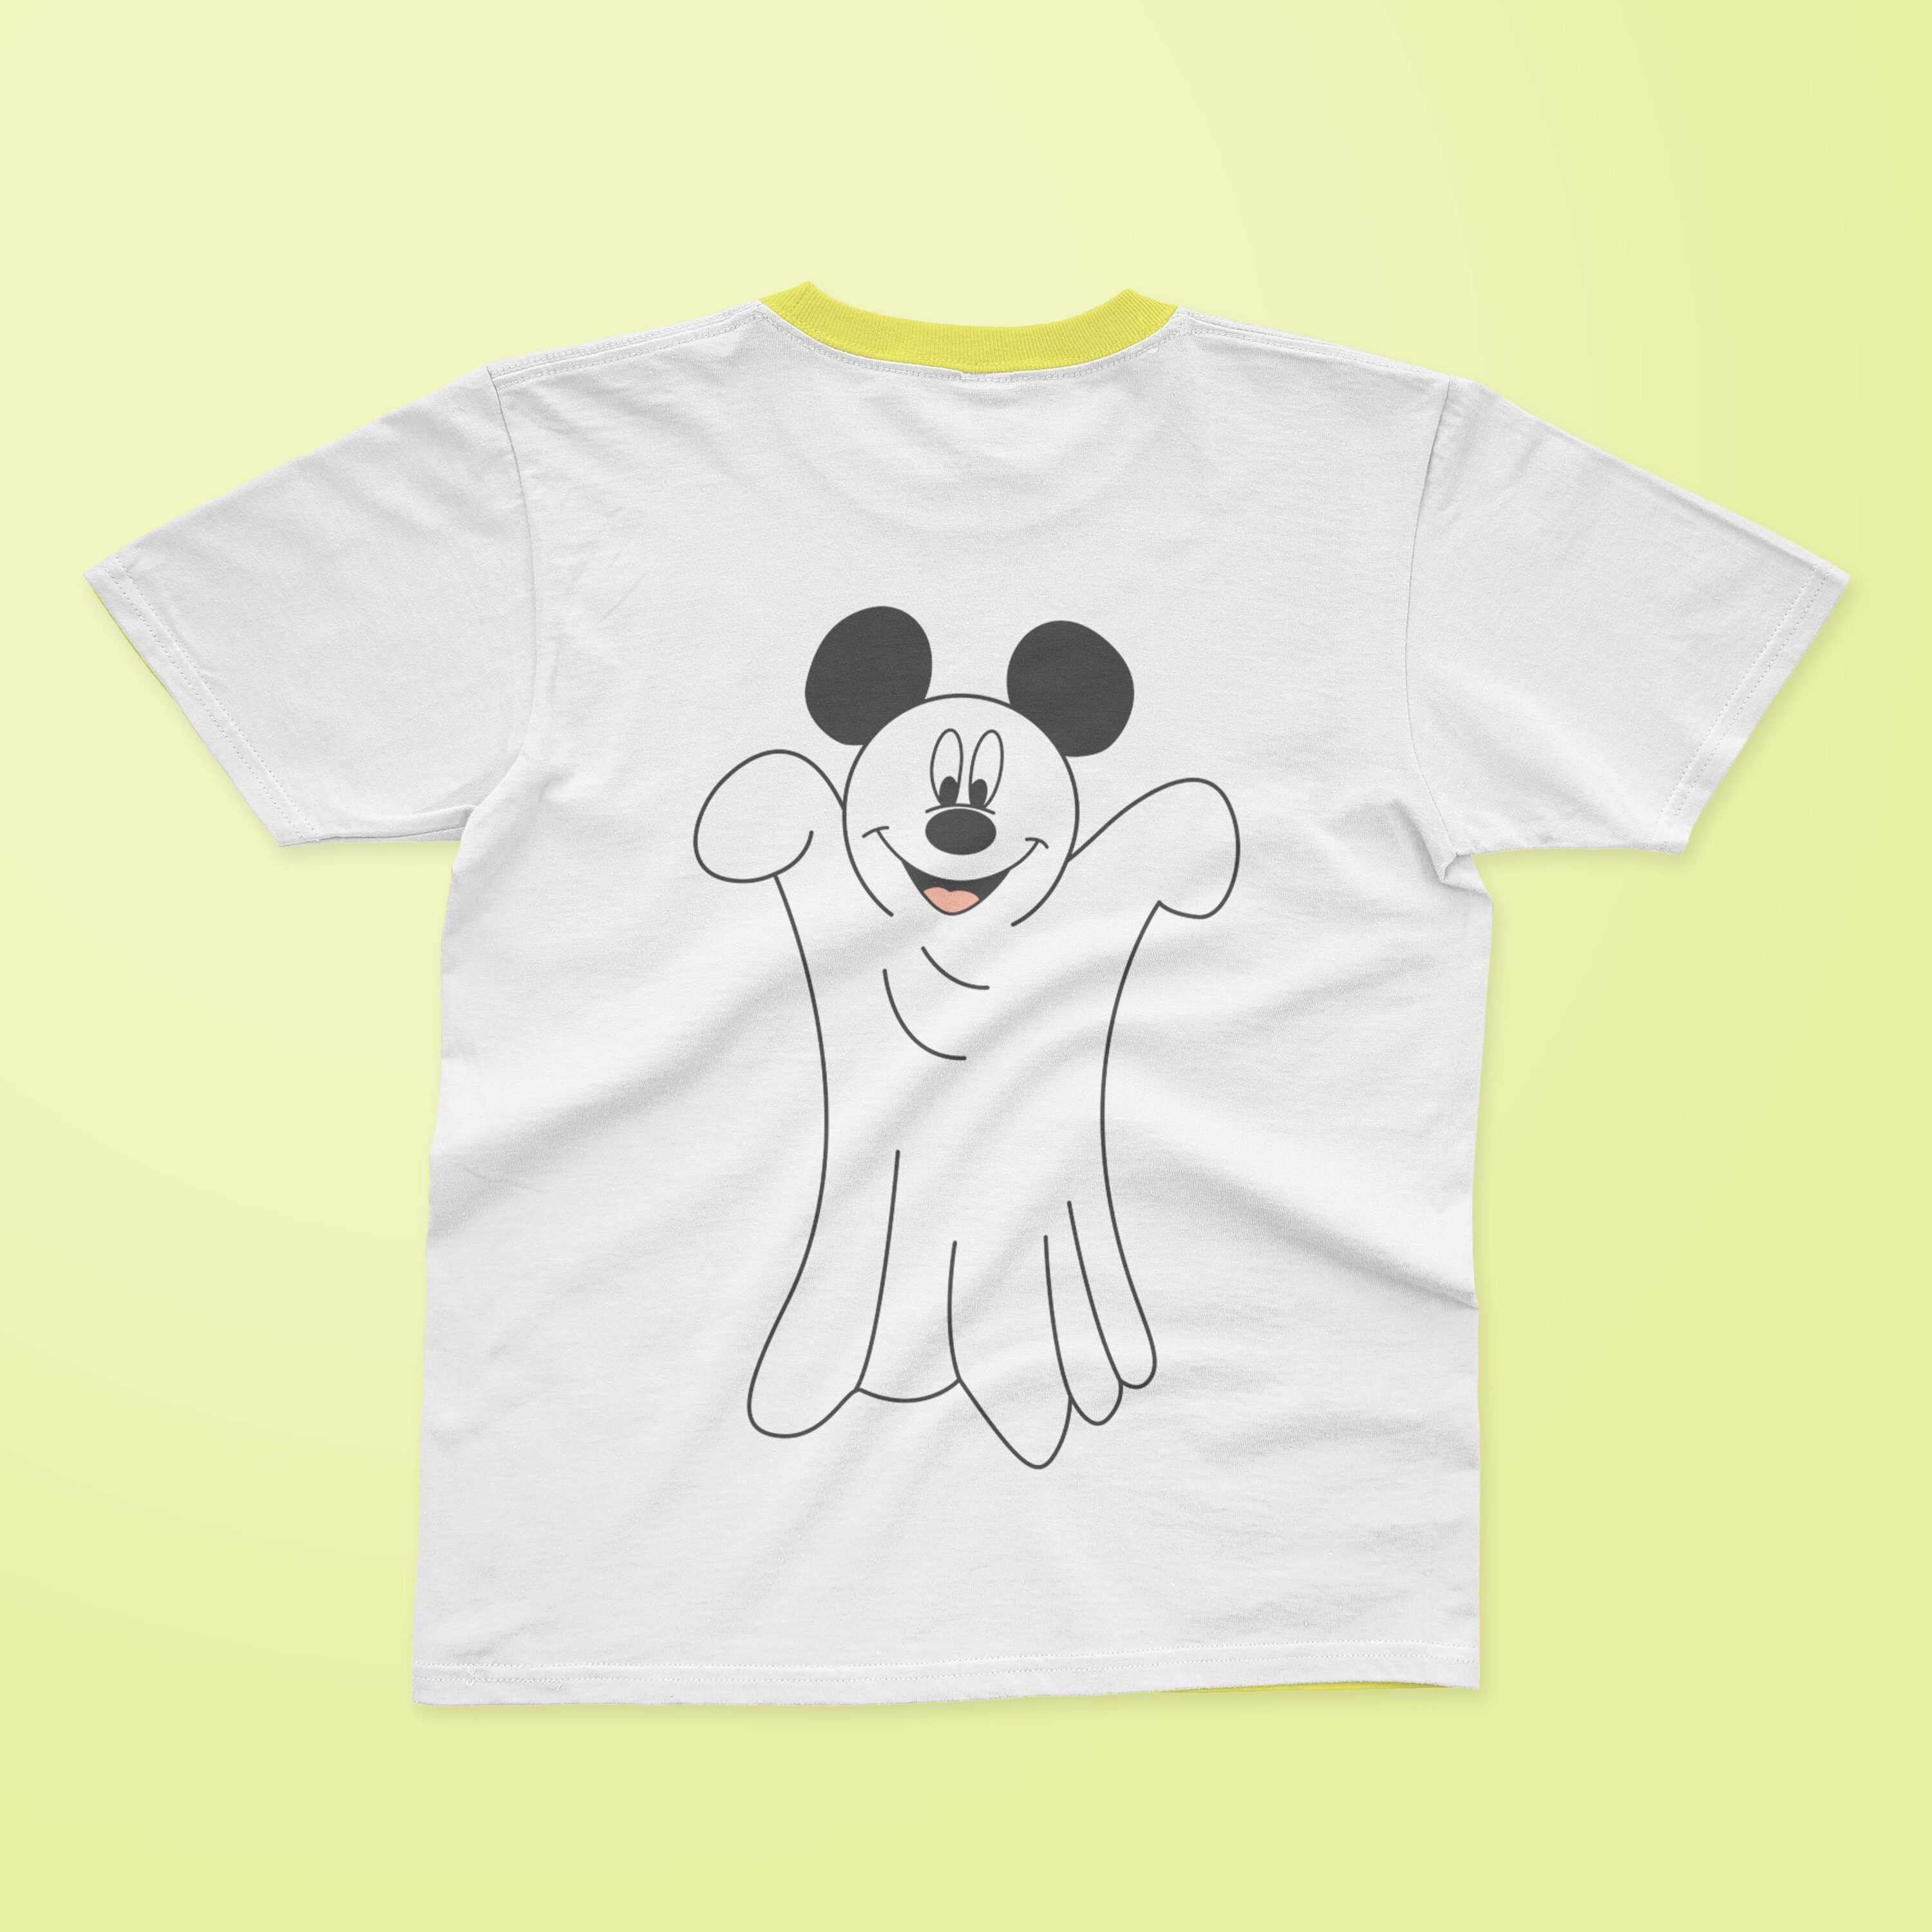 Funny Mickey Mouse ghost on a white t-shirt.